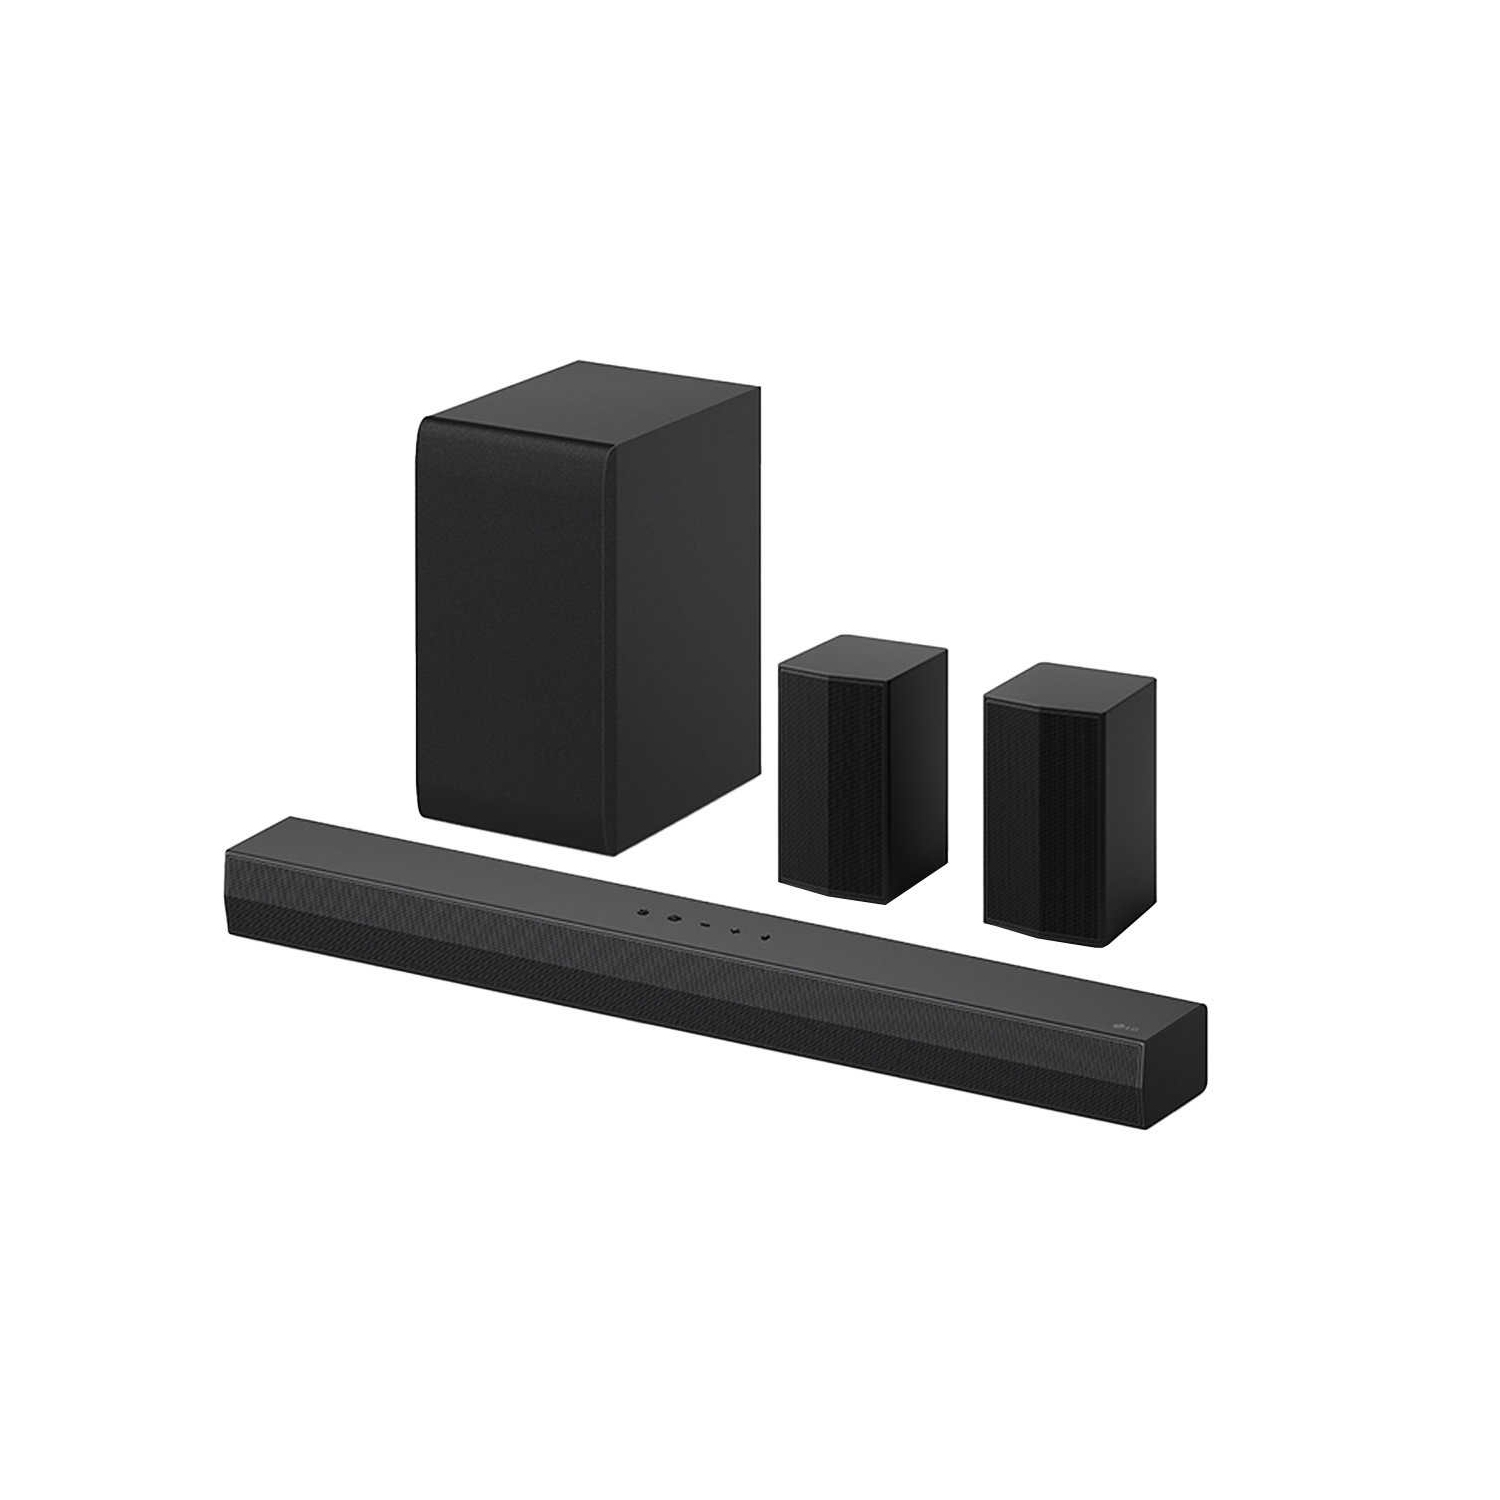 LG S45TR 4.1 ch Soundbar with Subwoofer and Rear Speakers